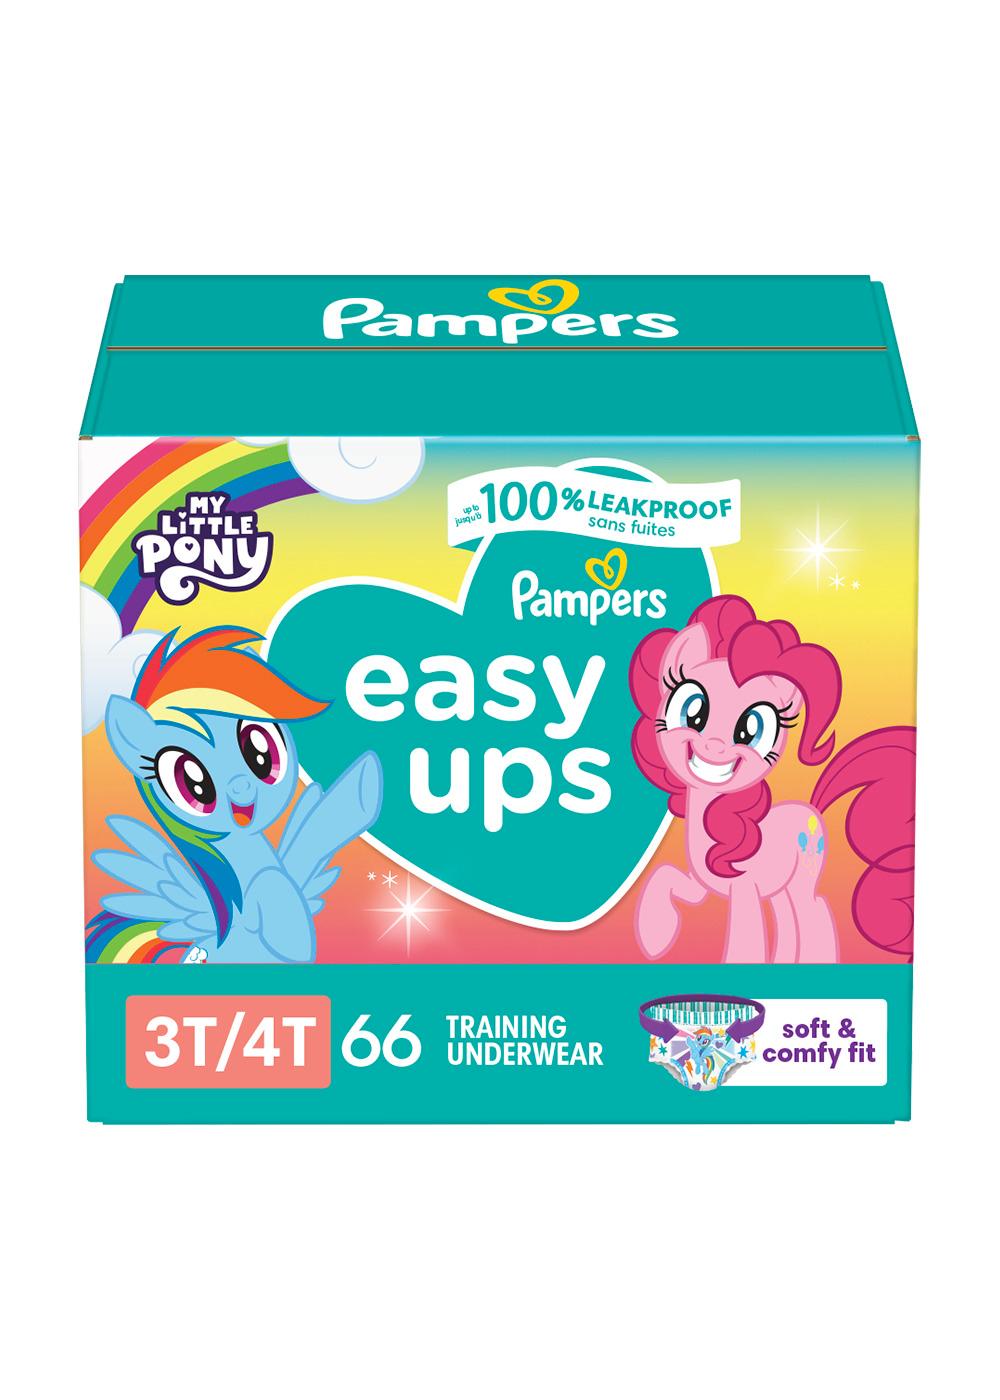 Pampers Easy Ups Girls Training Underwear - 3T - 4T; image 6 of 7